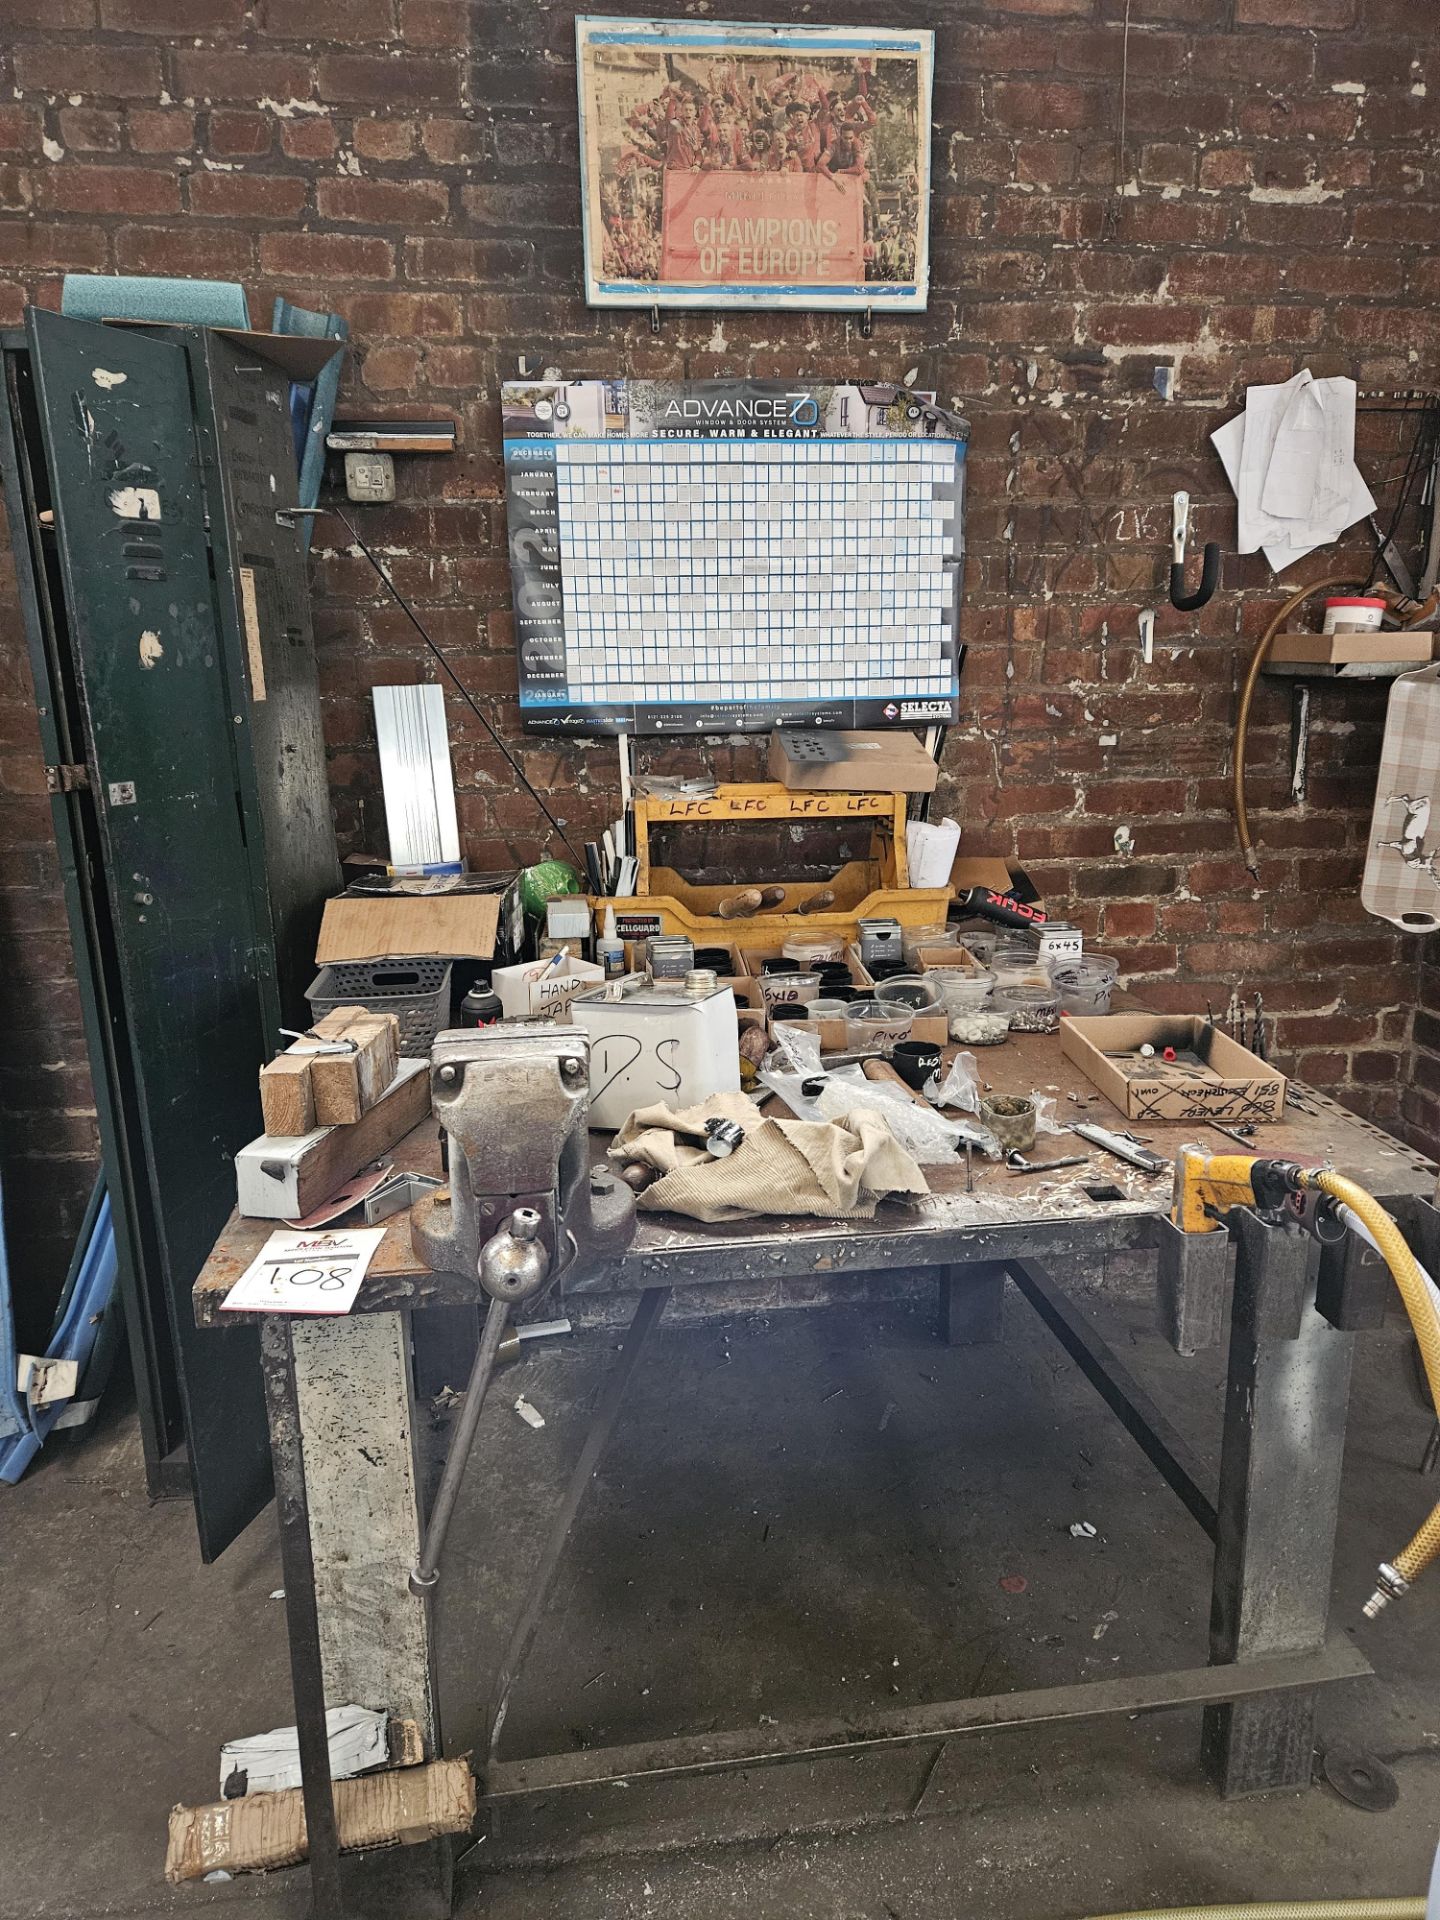 Workbench Plus Contents - Image 2 of 2